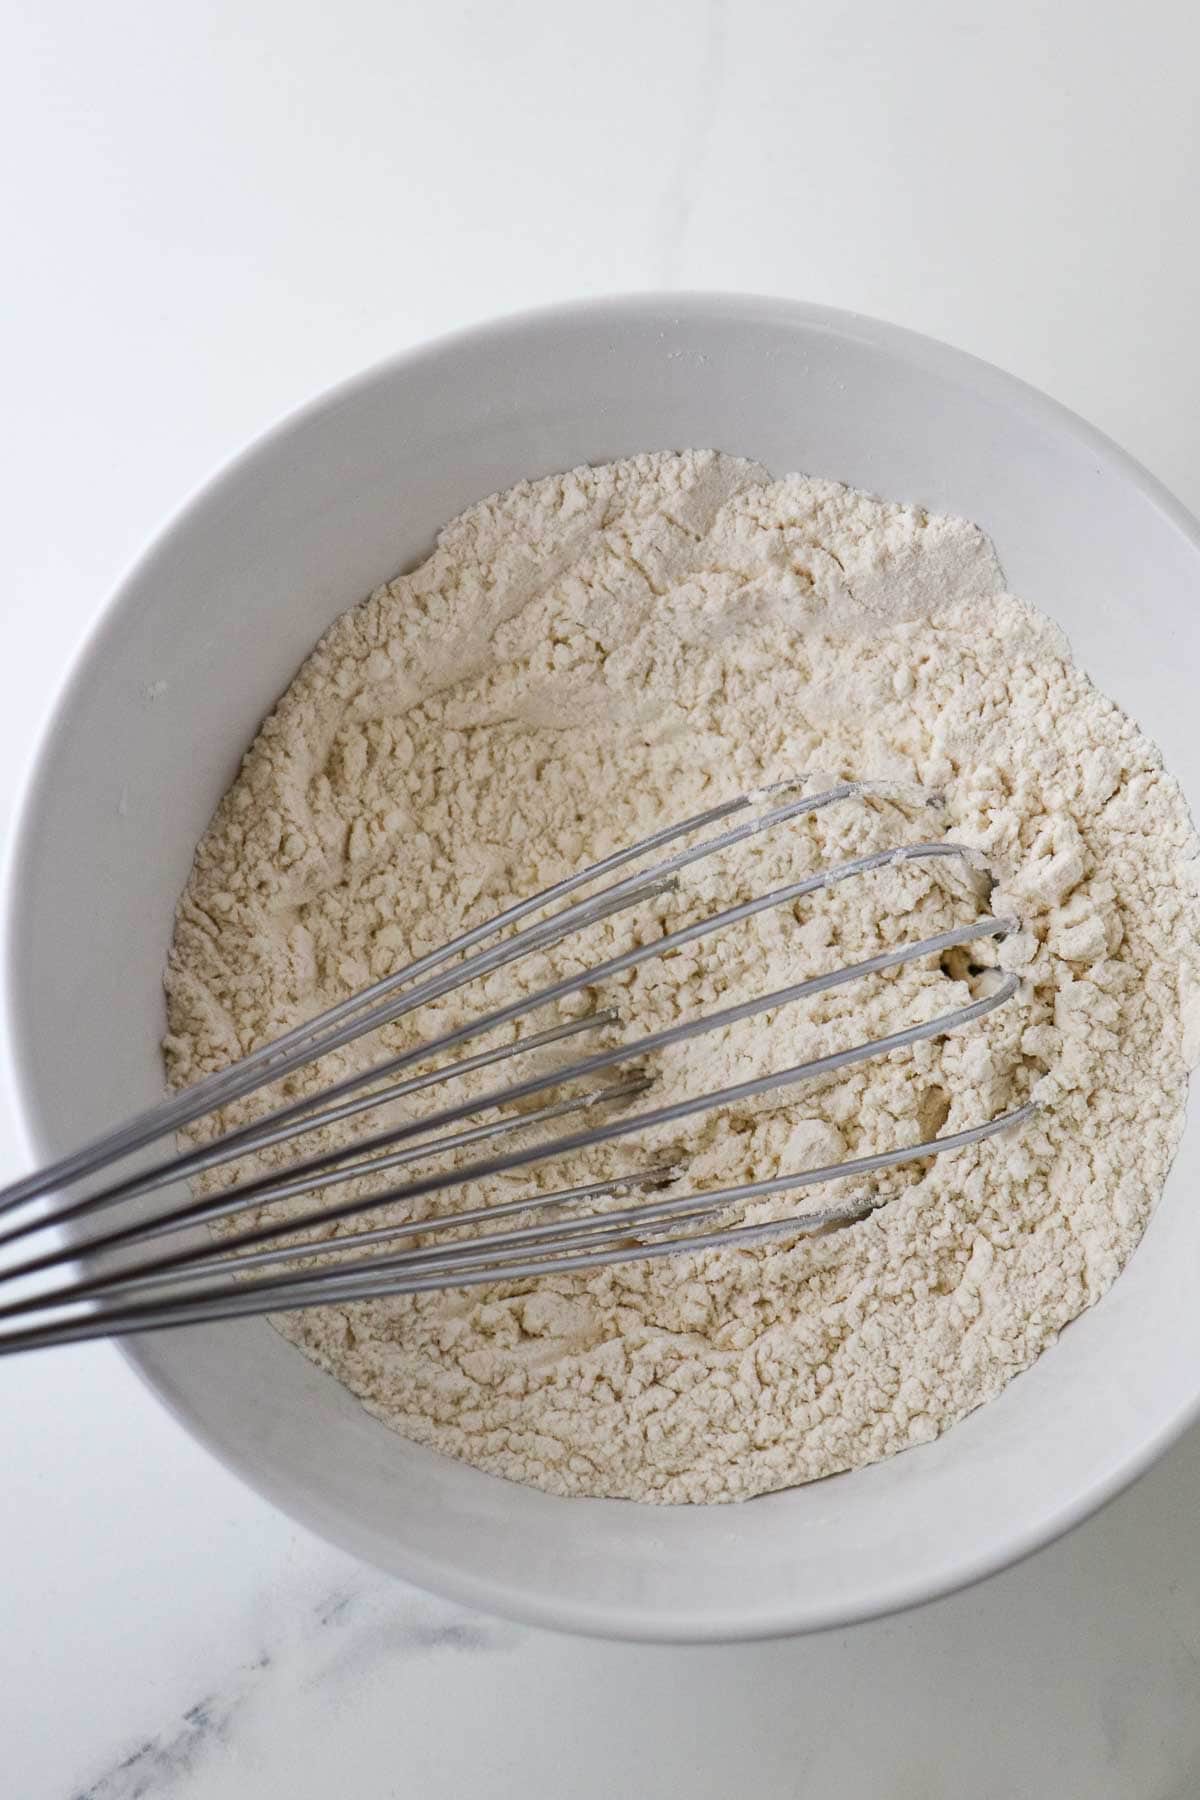 Dry ingredients in a white bowl with a whisk.